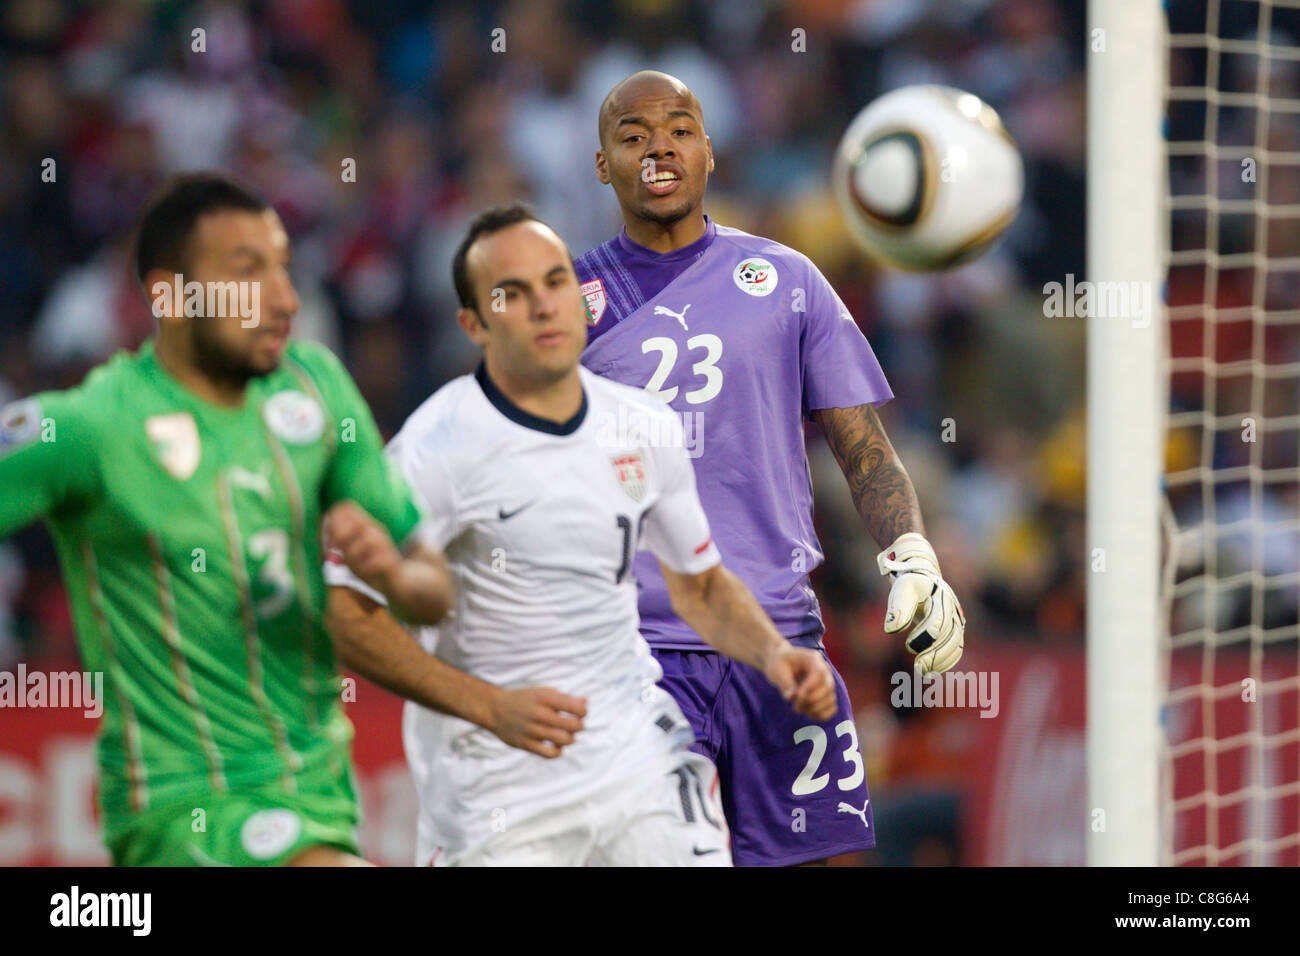 Goalkeeper Rais M'Bolhi of Algeria (23) watches a cross go wide during a FIFA World Cup Group C match against the United States. Stock Photo